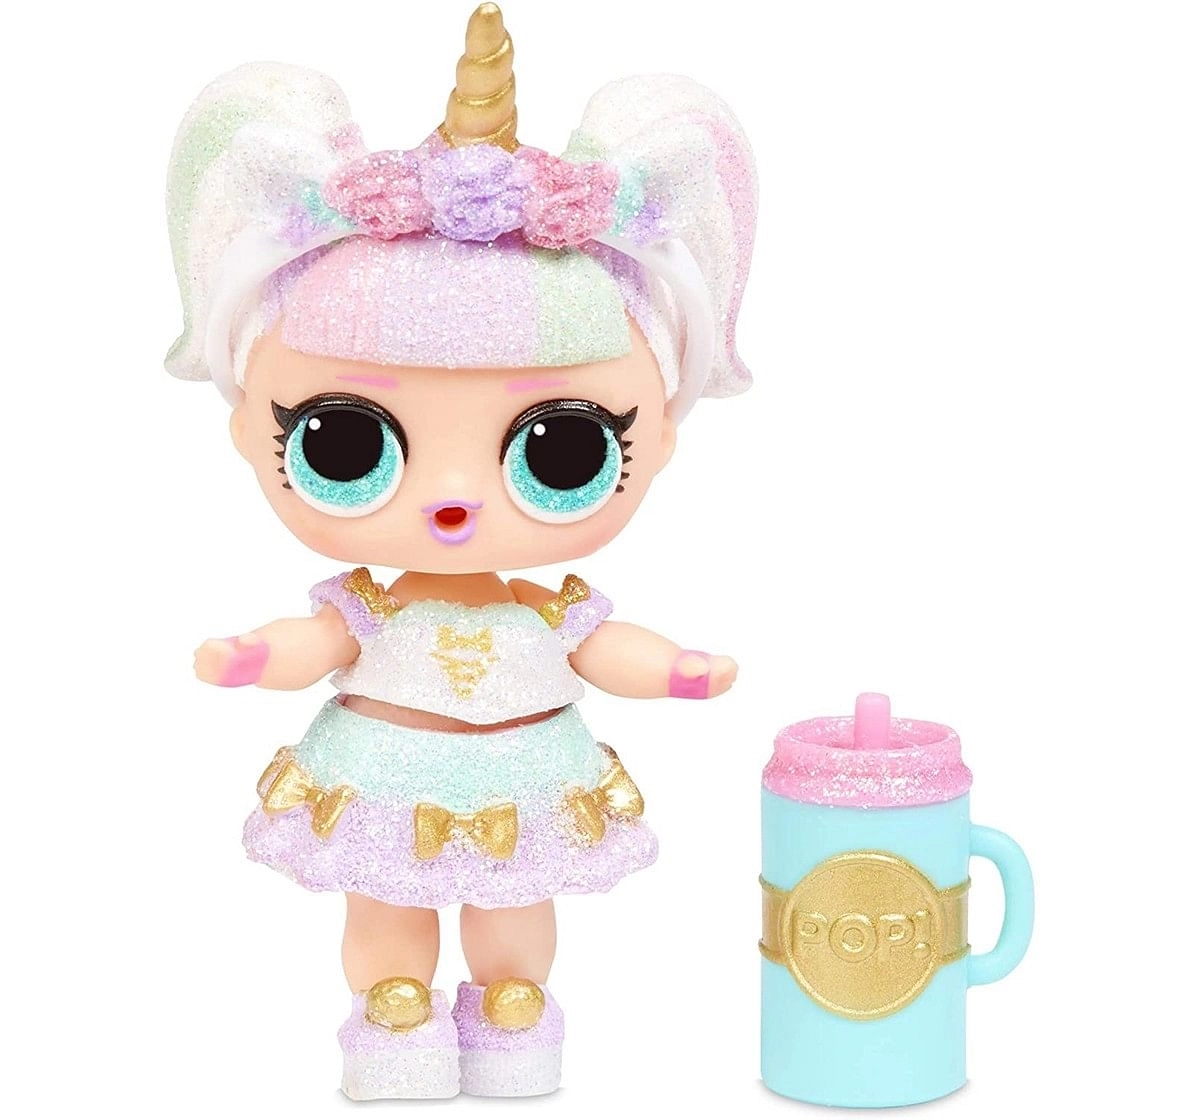 Shop Lol Surprise Sparkle Series Collectible Dolls for Girls age 6Y